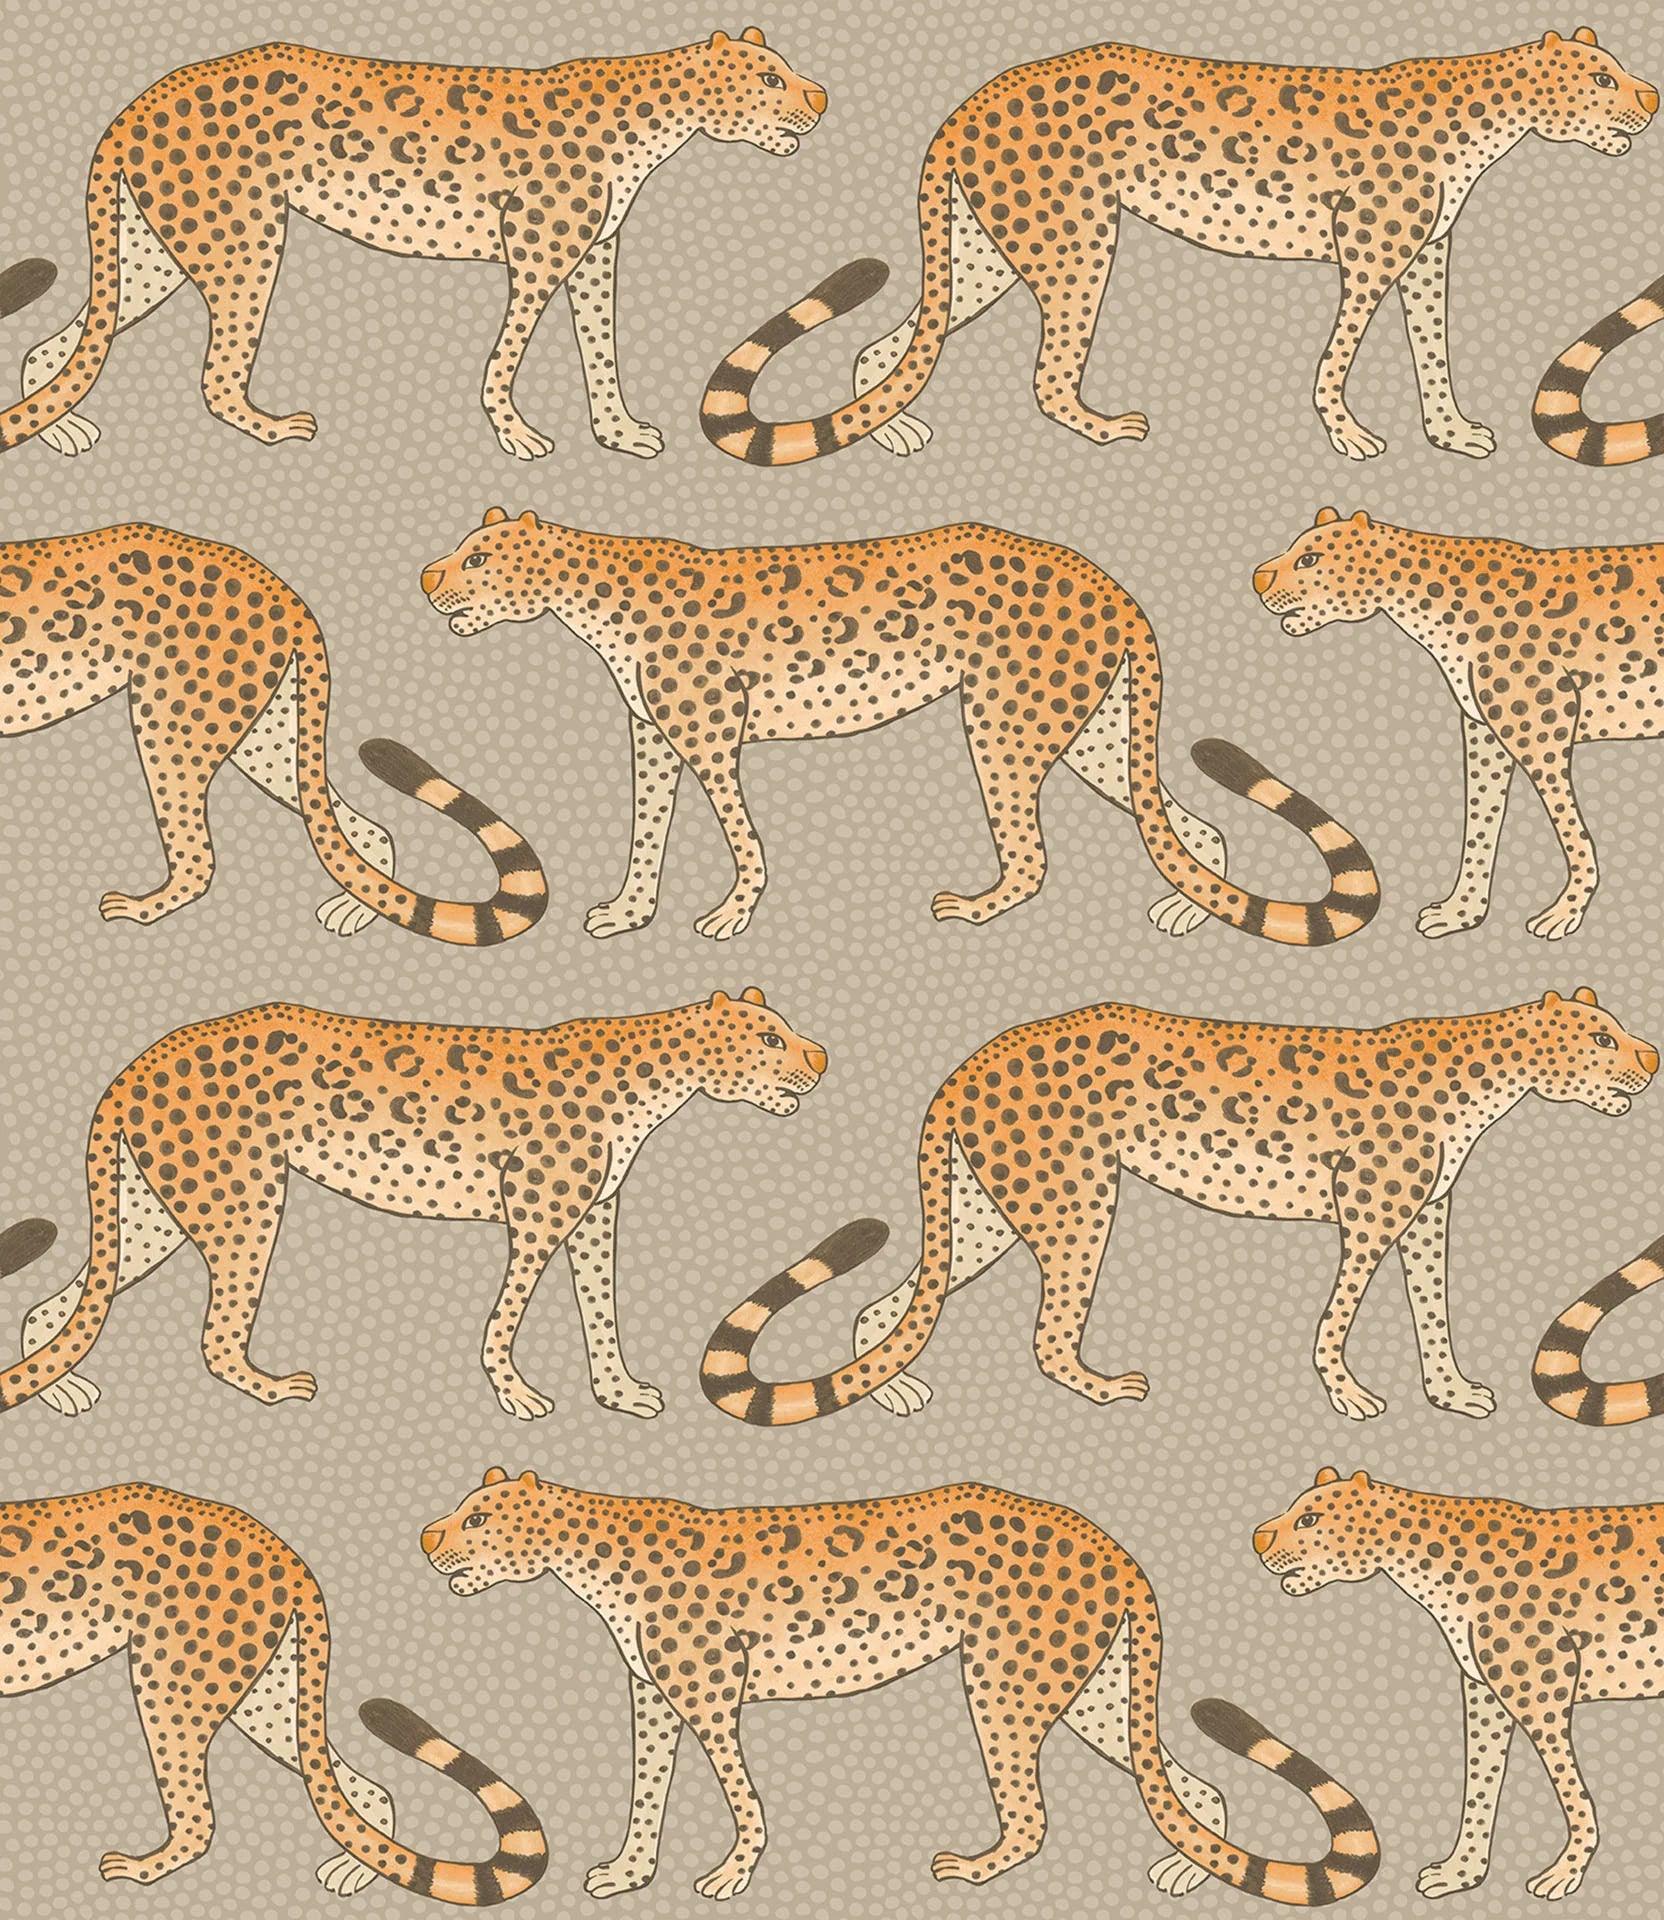 Tapeta THE ARDMORE COLLECTION - Leopard Walk beżowy Cole & Son    Eye on Design